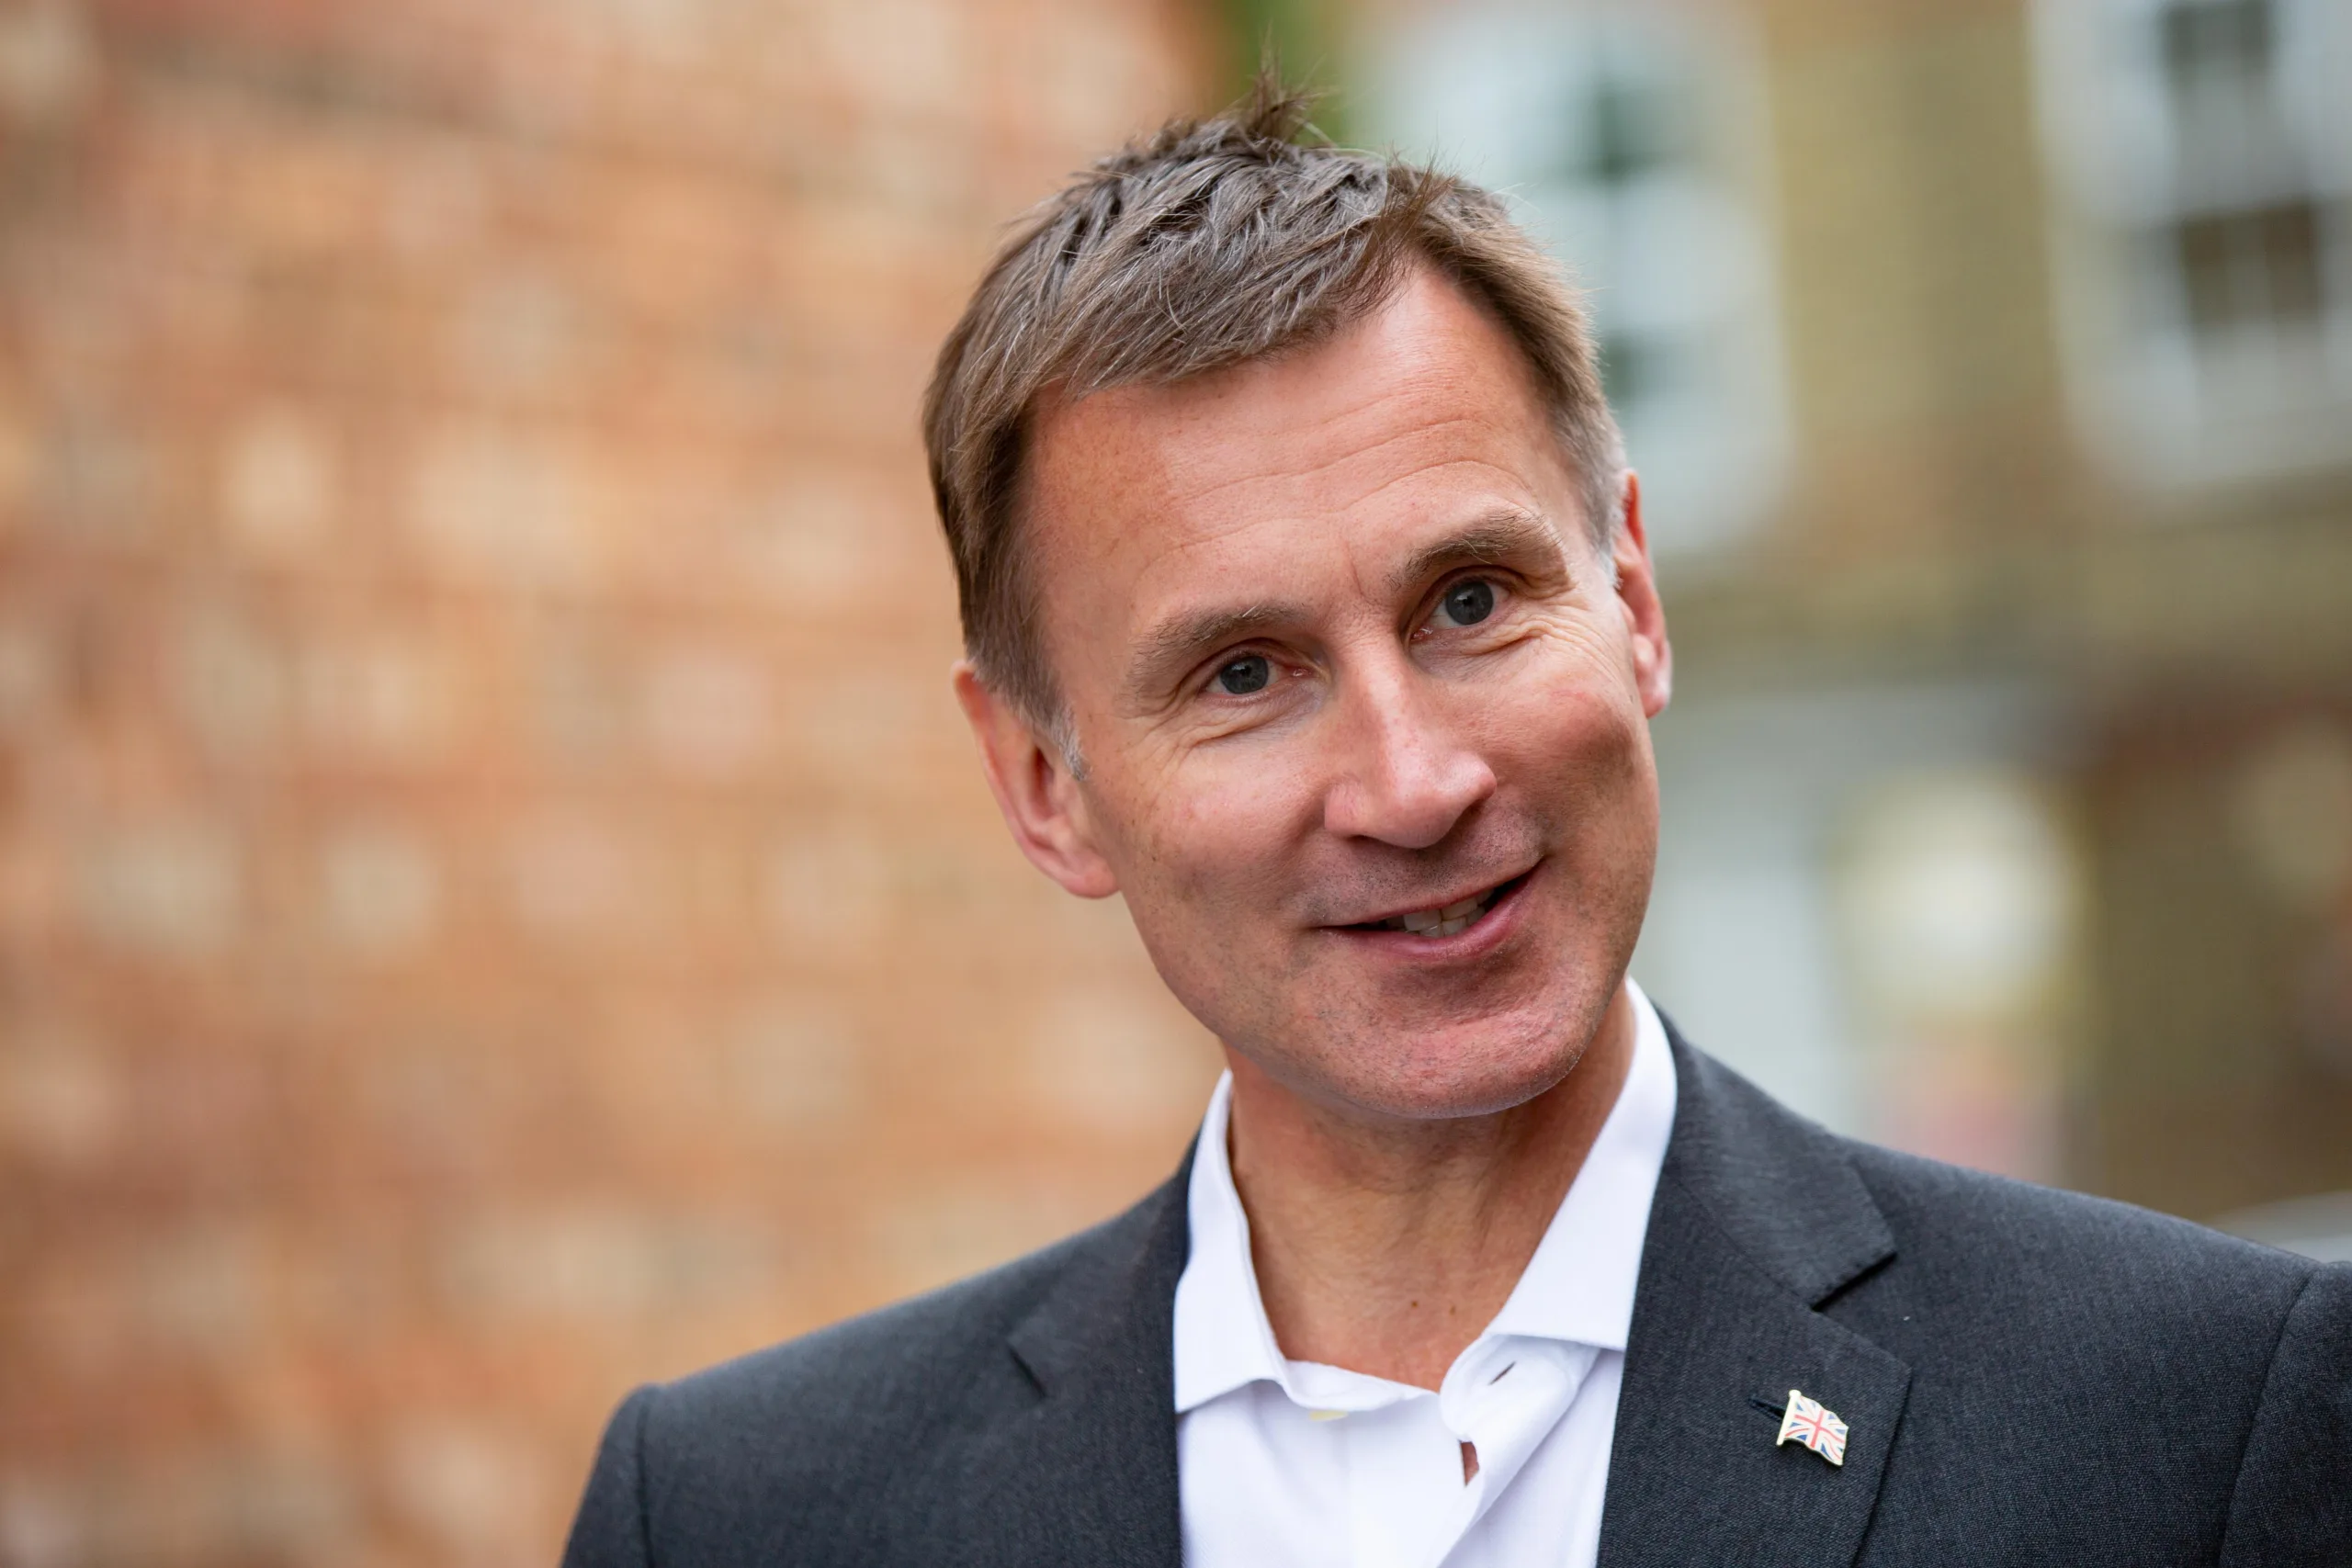 Cllr Elisa Meschini, Deputy Leader of Cambridgeshire County Council and leader of the Labour group on Cambridgeshire County Council, has written an open letter to Chancellor Jeremy Hunt (above) PHOTO: Terry Harris